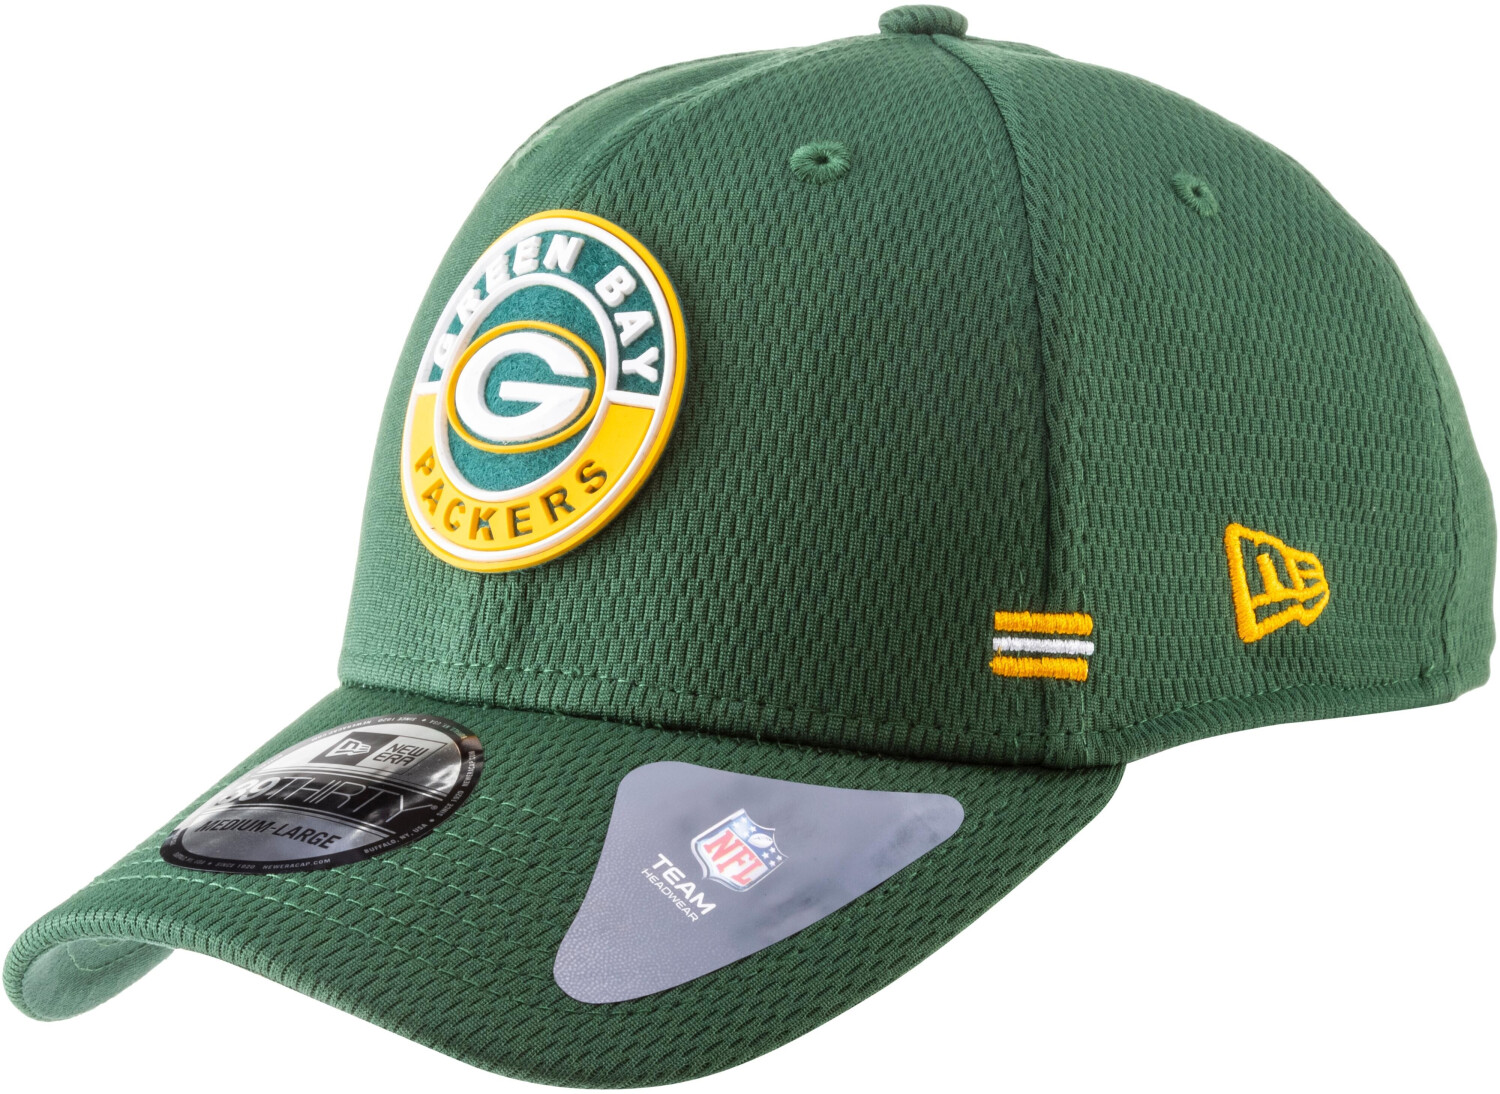 New Era 39Thirty Sideline Green Bay Packers Cap official team colour ab